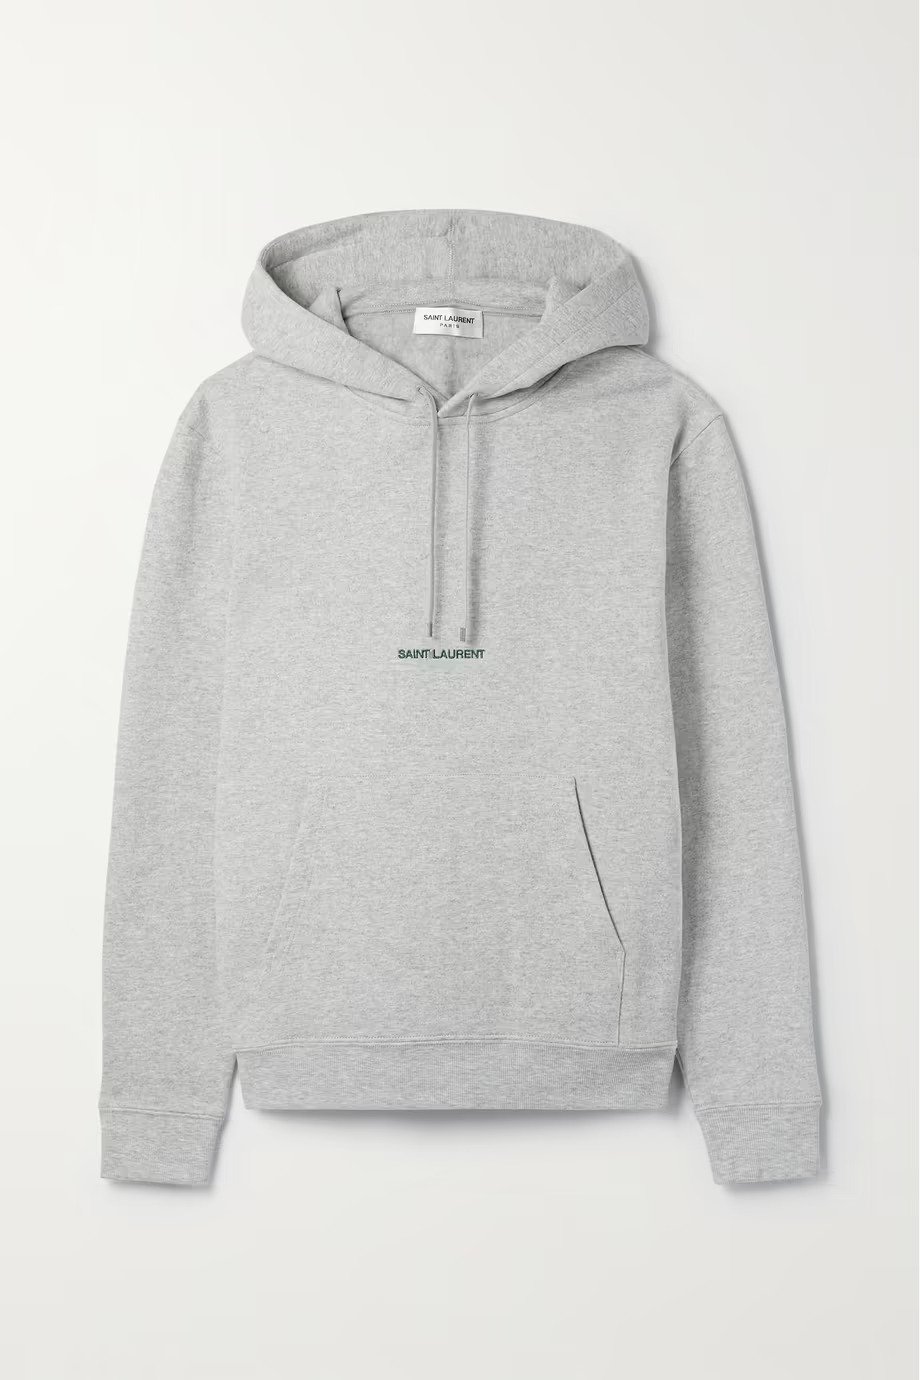 Saint Laurent + Embroidered Cotton-Blend Jersey Hoodie